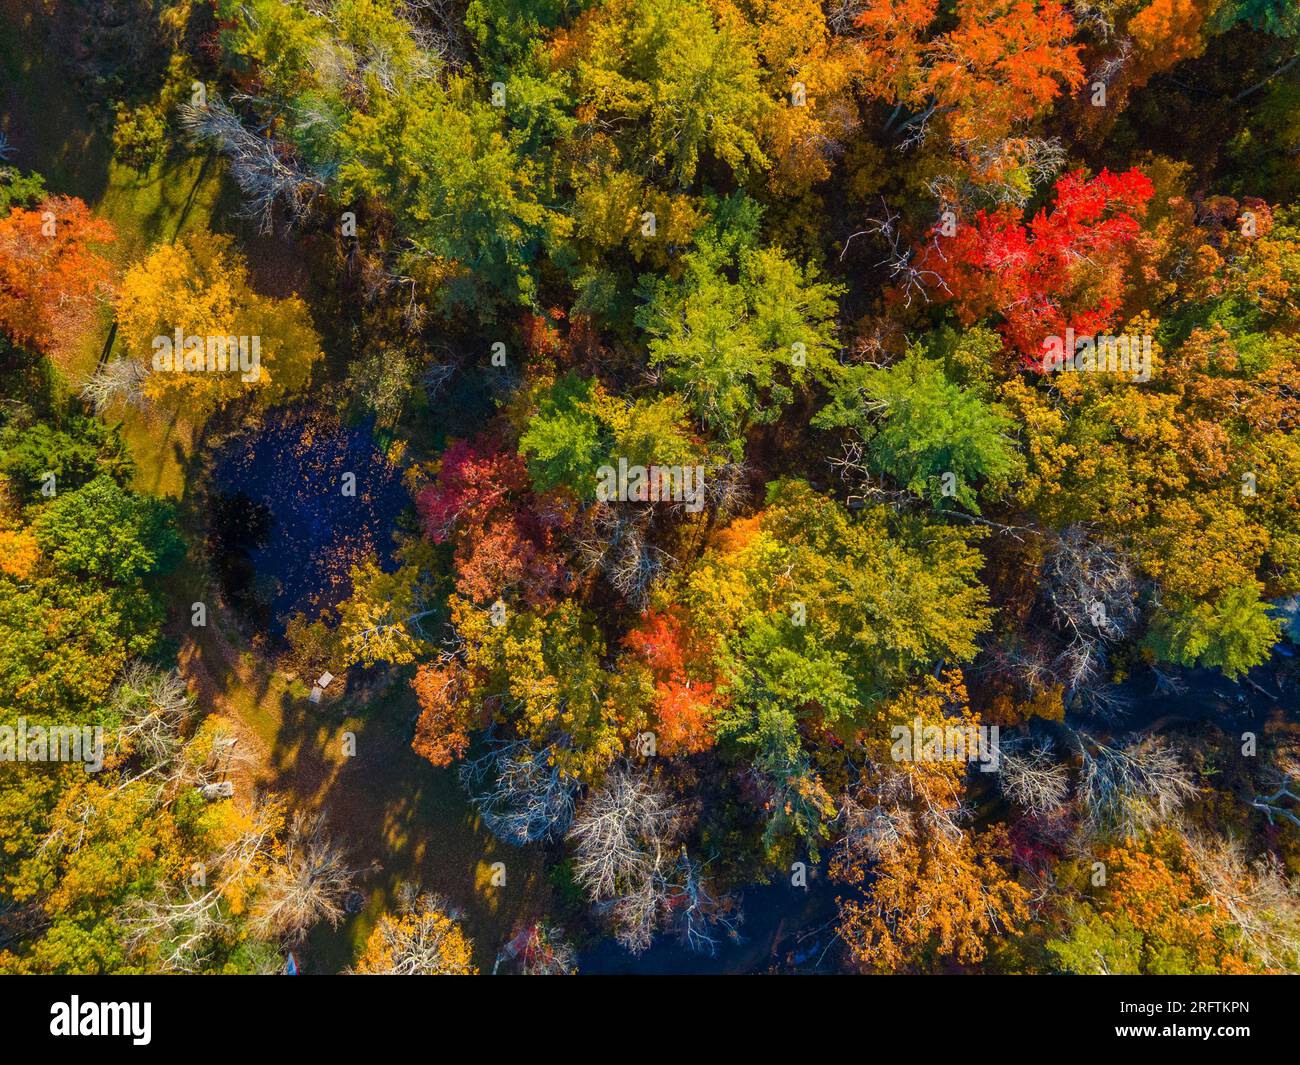 Furnace Brook top view with fall foliage in town of Kingston, Massachusetts MA, USA. Stock Photo